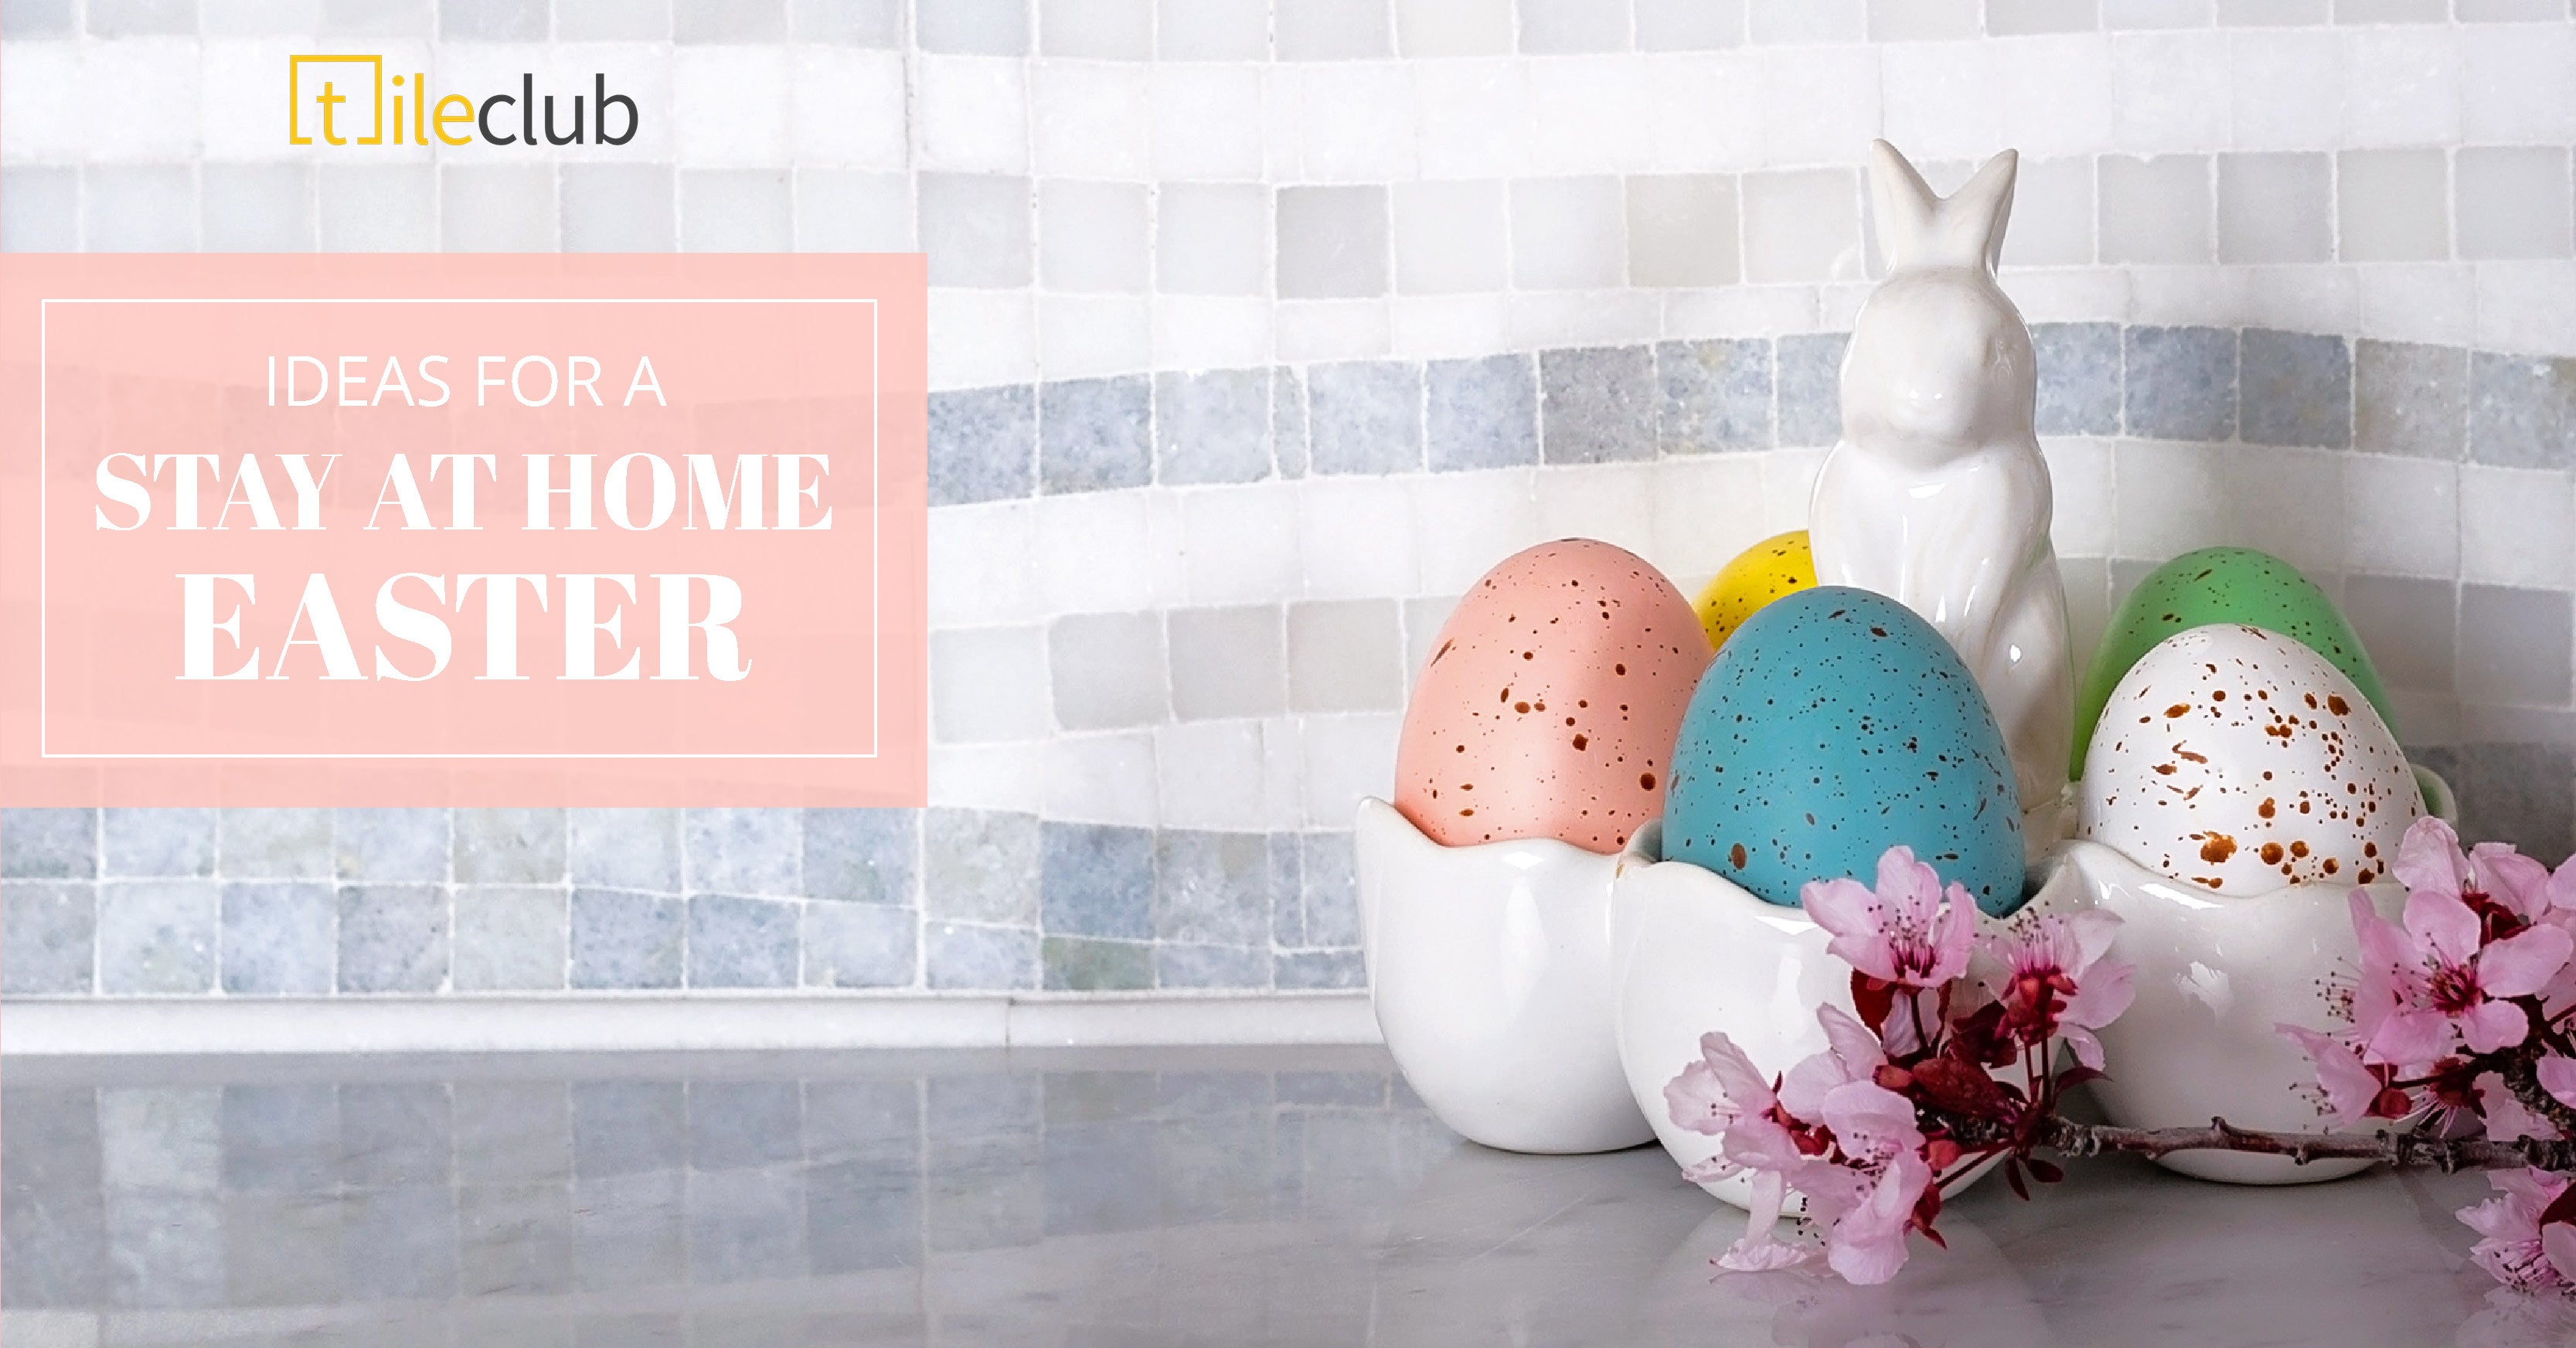 Celebrate a Stay at Home Easter while Self-Isolating